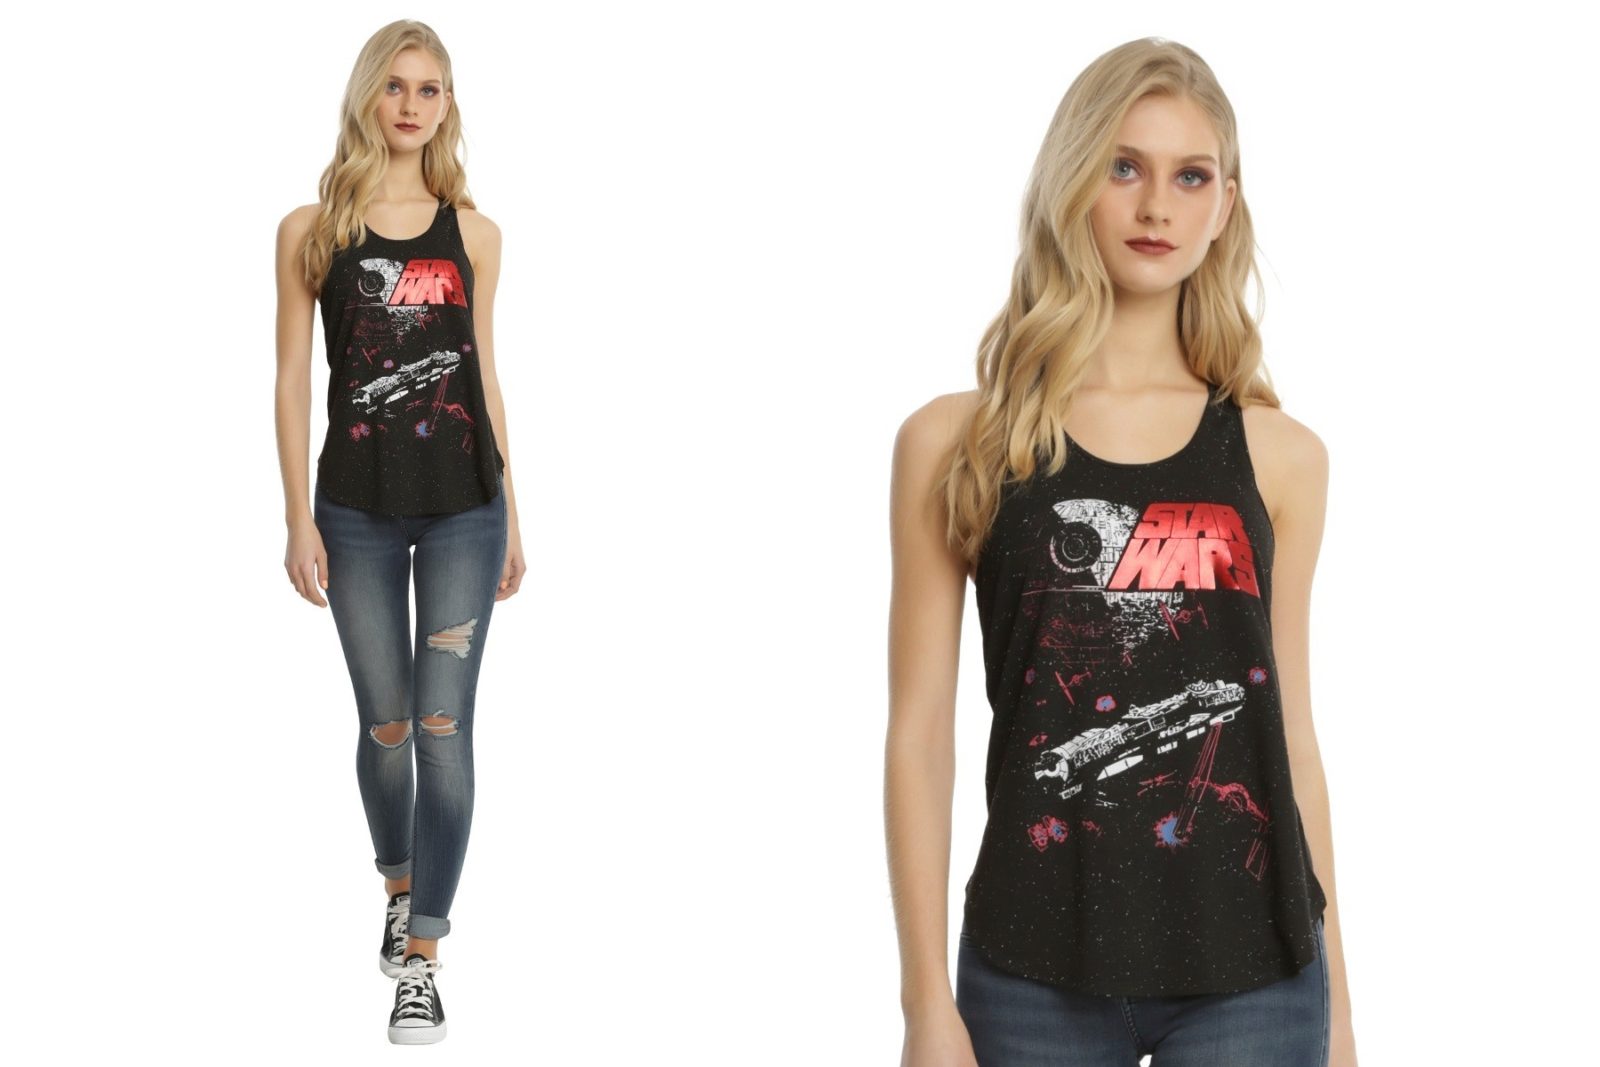 Women's Star Wars red foil logo Death Star Battle tank top at Hot Topic